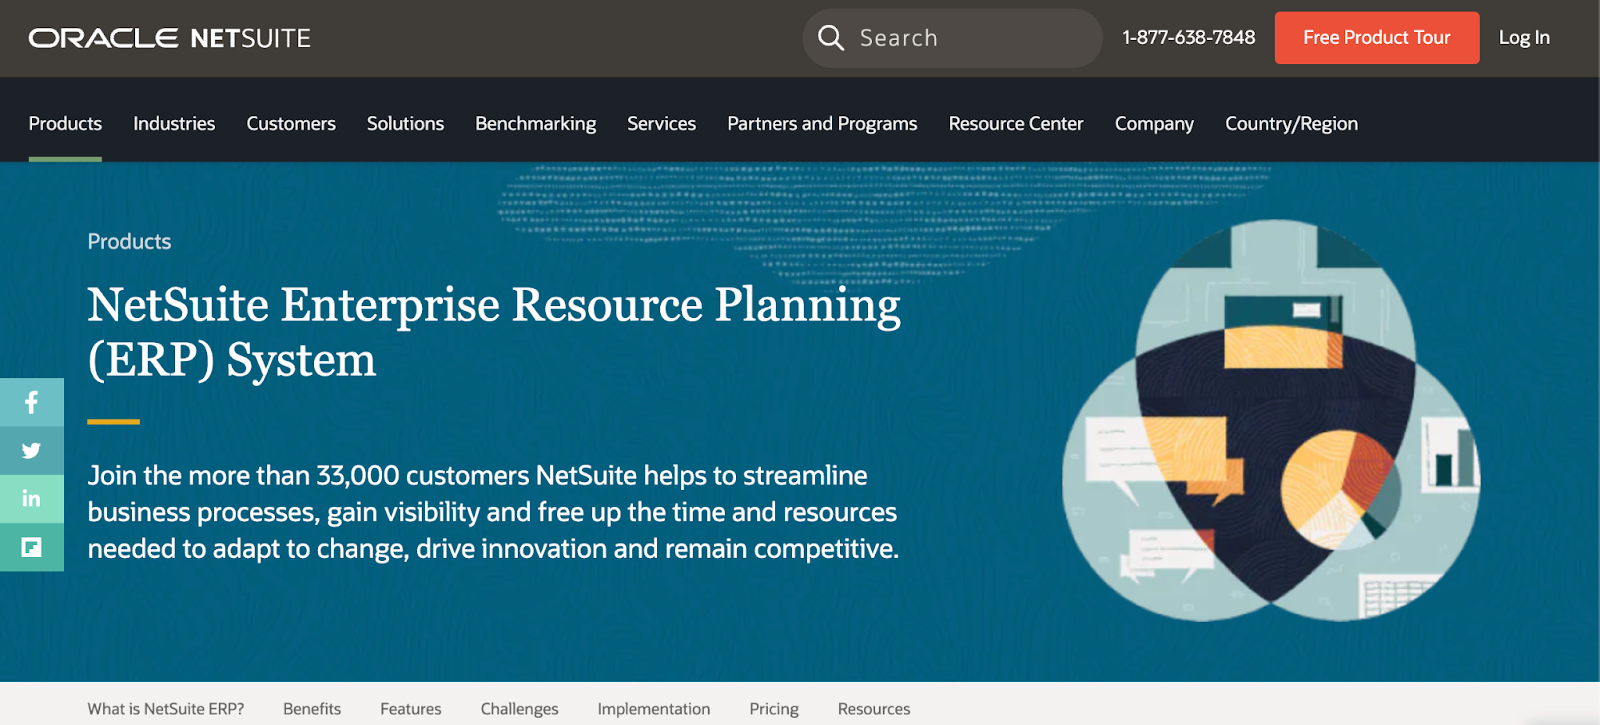 Oracle Netsuite landing page